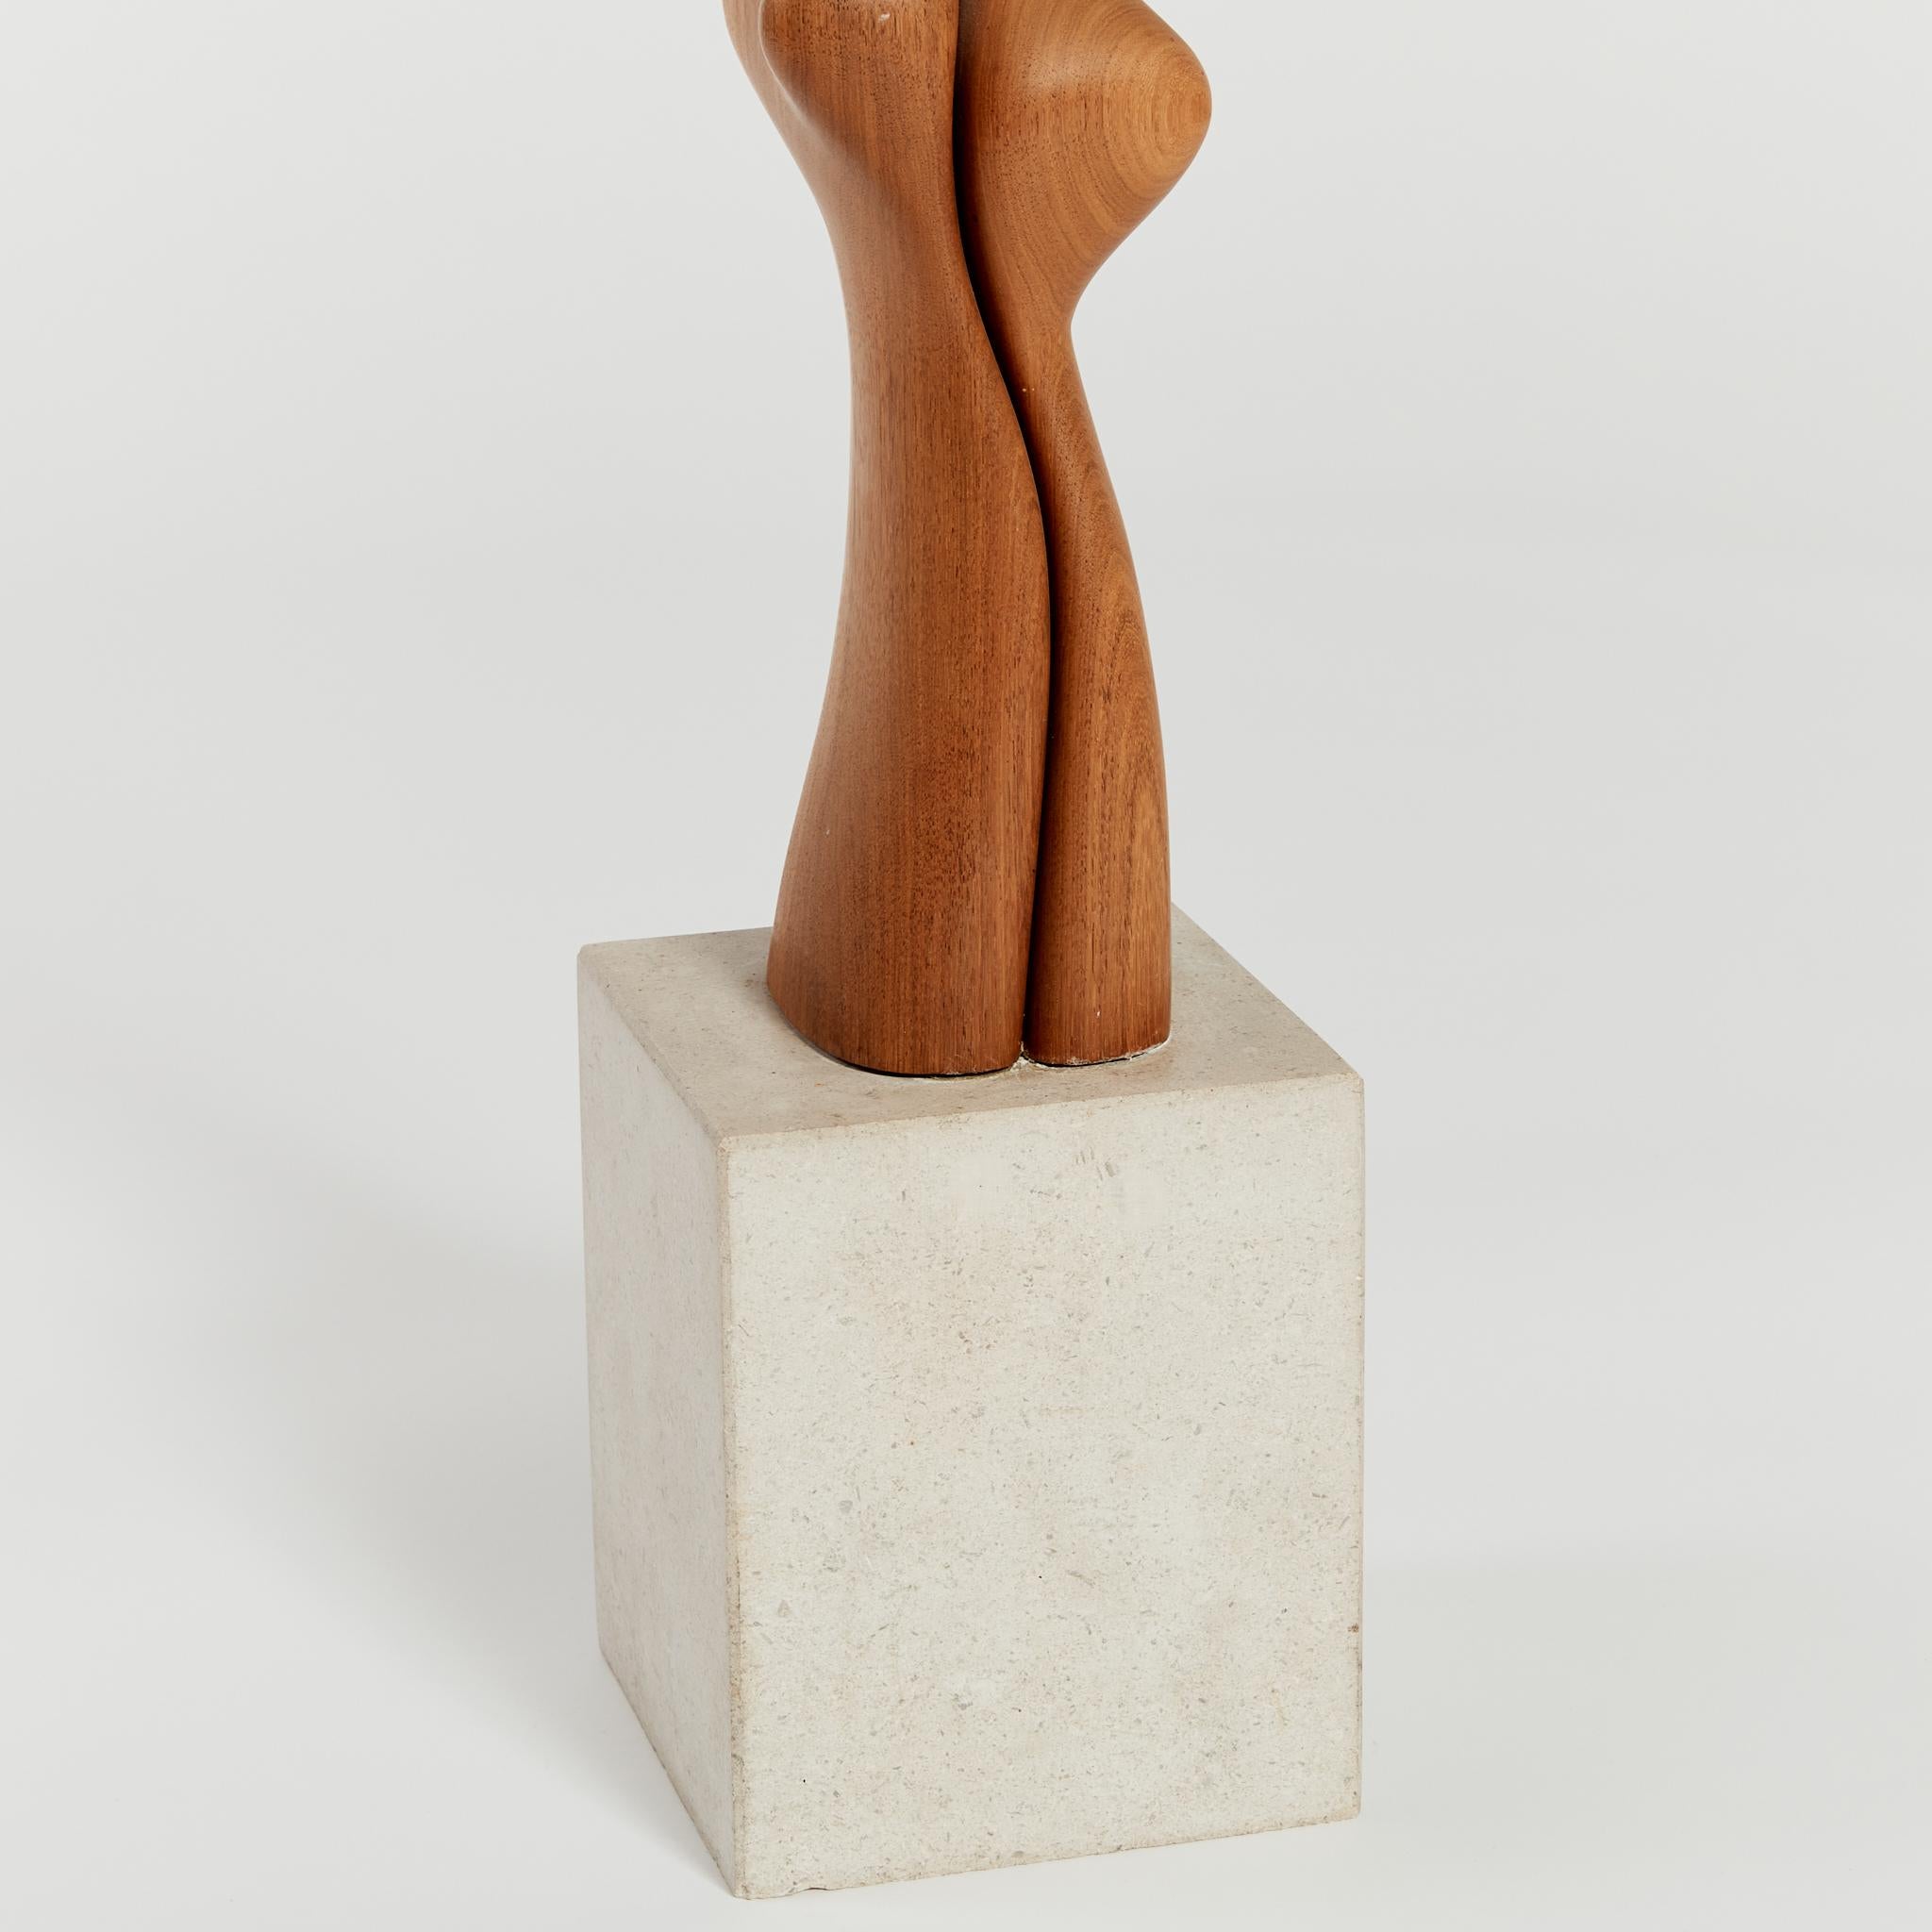 Tall Biomorphic Wood Floor Sculpture with Concrete Plinth 4